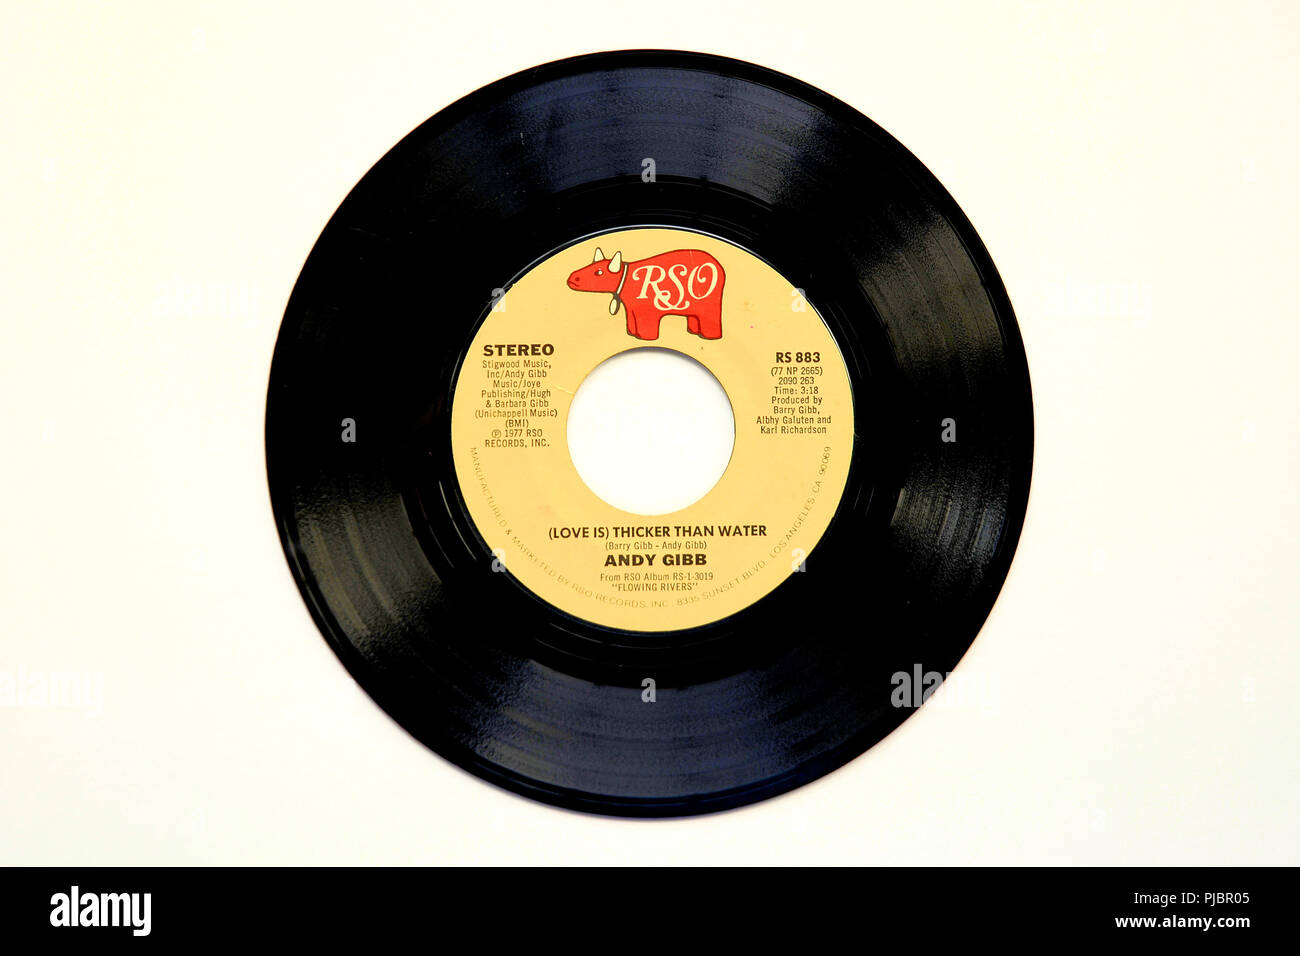 45 RPM vinyl record of Andy Gibb's song "(Love is) Thicker than Water" released in 1977 by RSO Records. Stock Photo